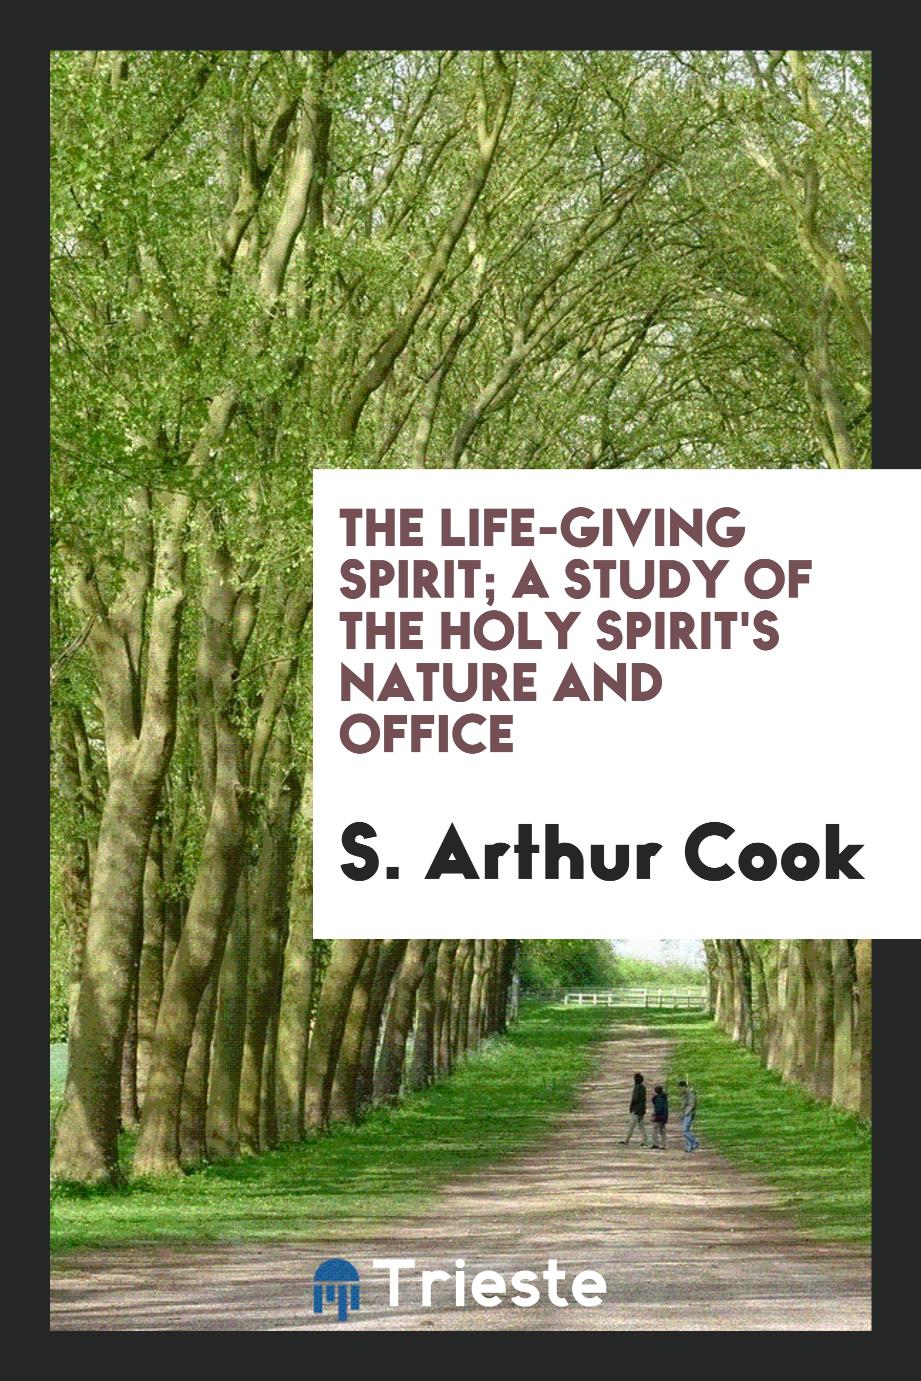 The life-giving spirit; a study of the Holy Spirit's nature and office